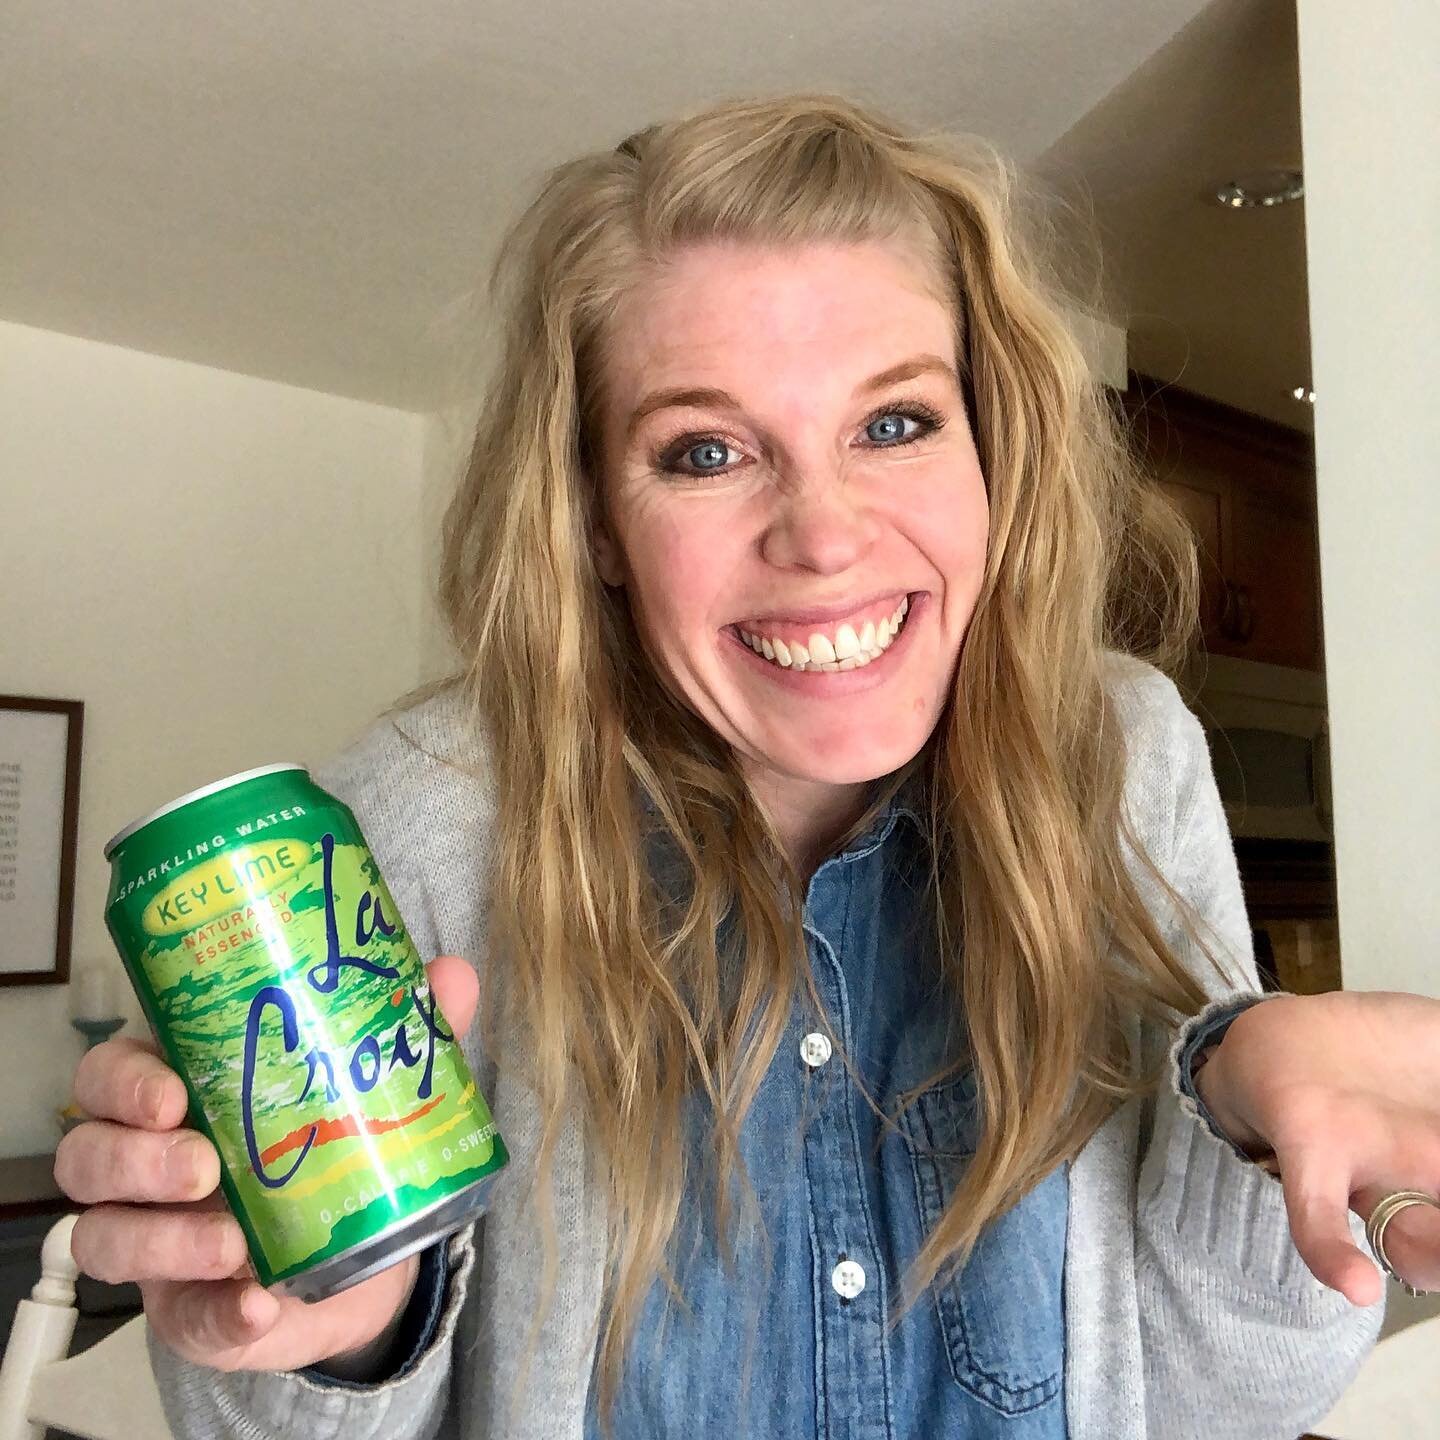 No one has pinched me yet!🍀

I forgot to wear green today, so I'll just be carrying this @lacroixwater can around with me 😜

I know there are some big opinions out there on LaCroix. Are you a fan? 

I try to stay away from sugary drinks and sparkli